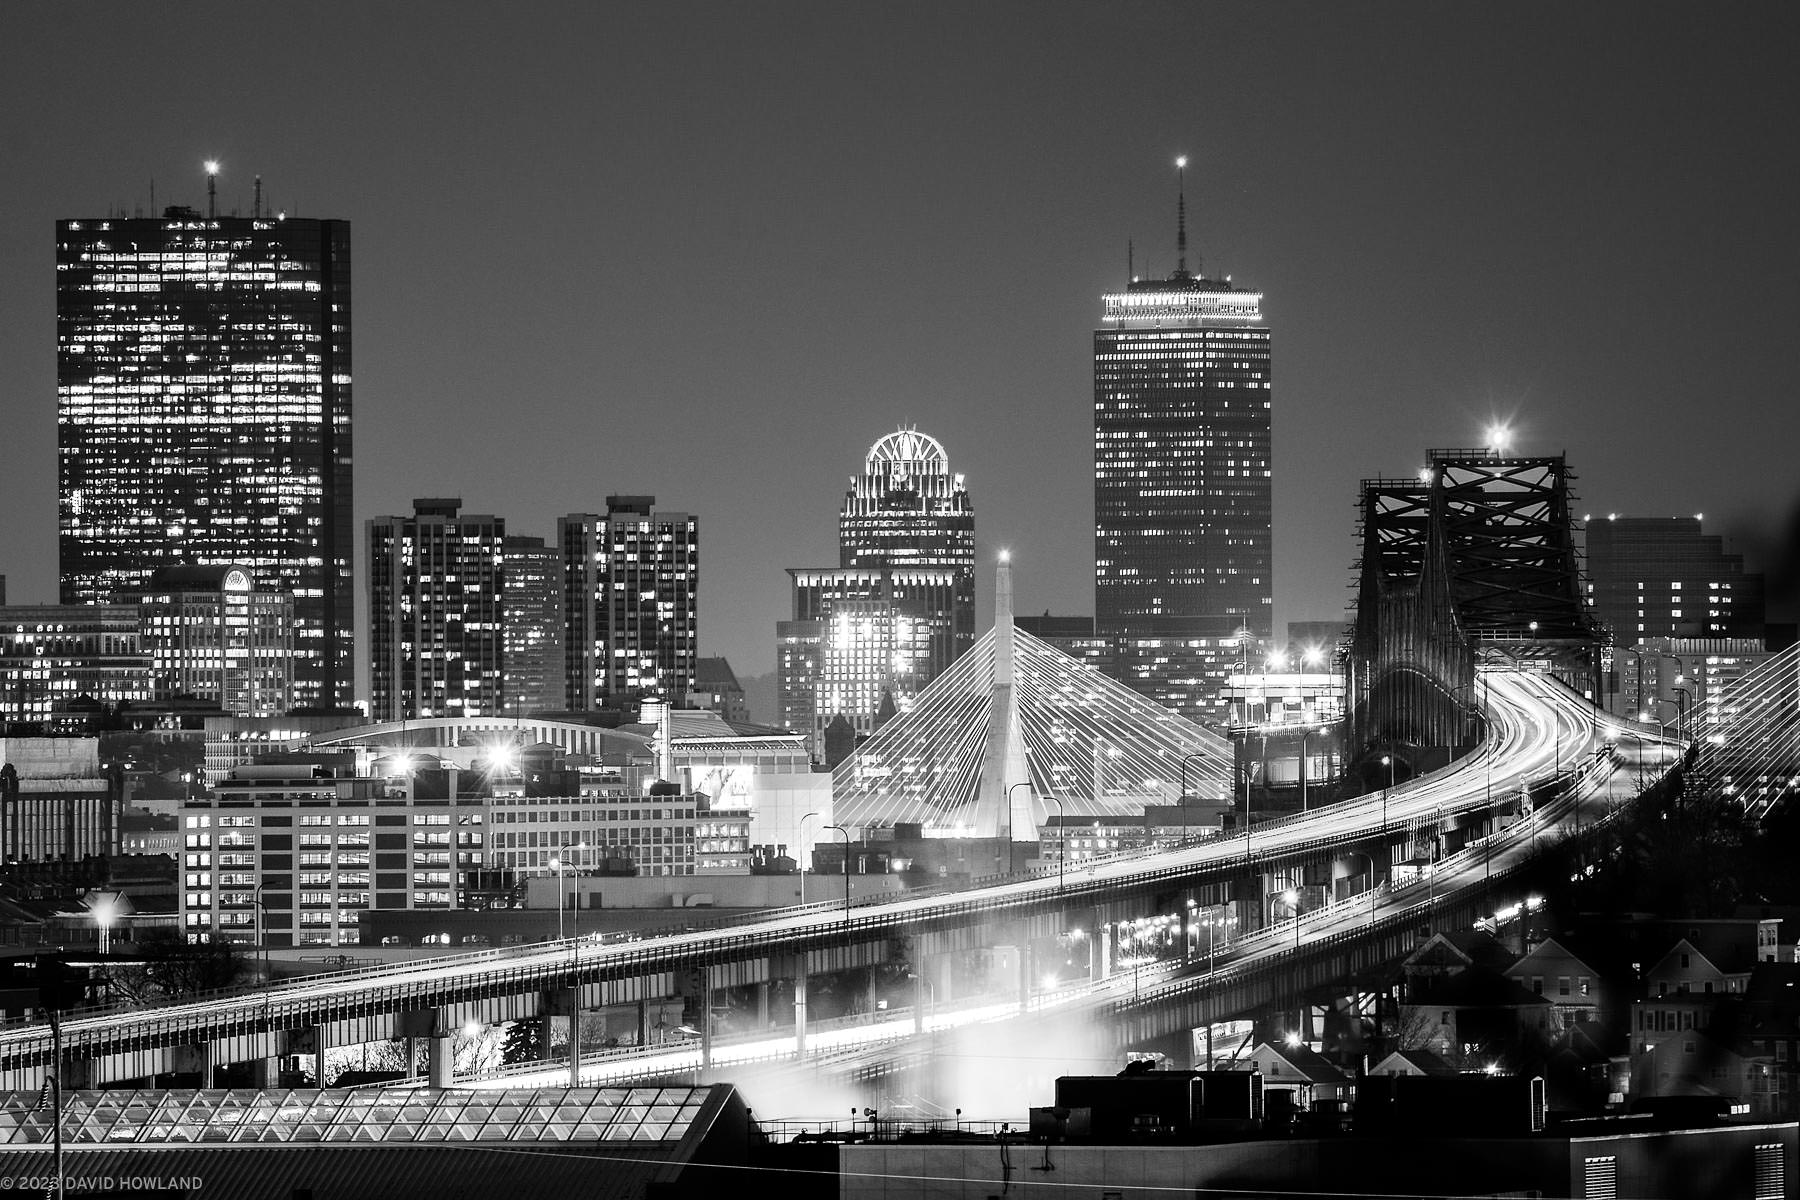 A black and white photo of the illuminated skyscrapers and bridges of Boston, Massachusetts at night.